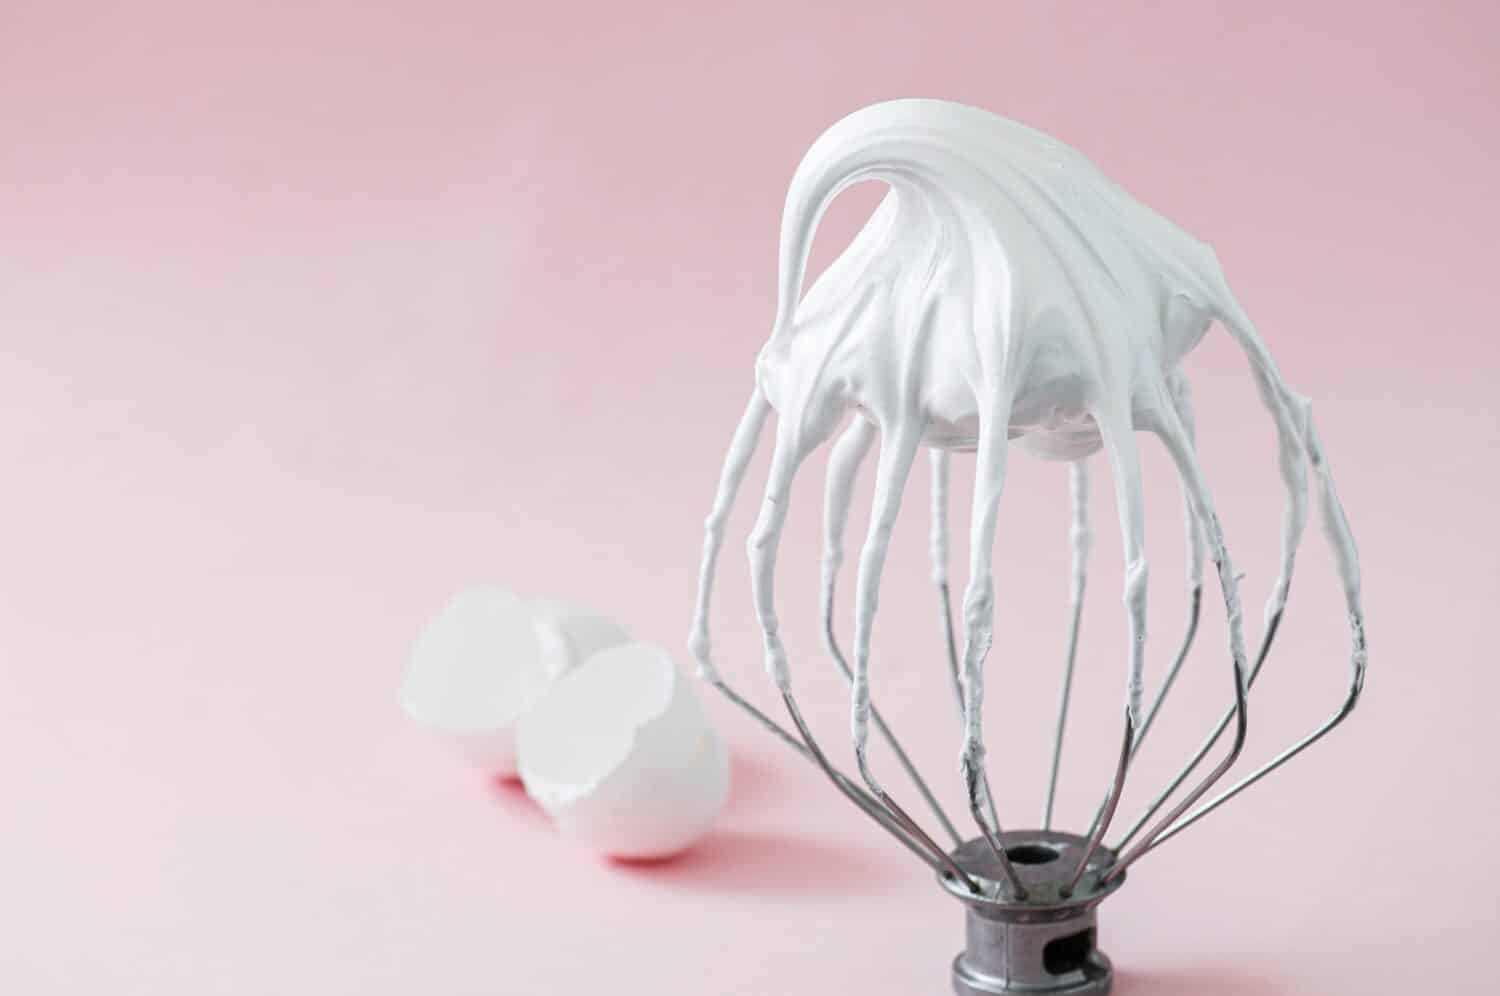 Whipped egg whites - beaten italian meringue on a wire whisk and egg shells on pink background. 